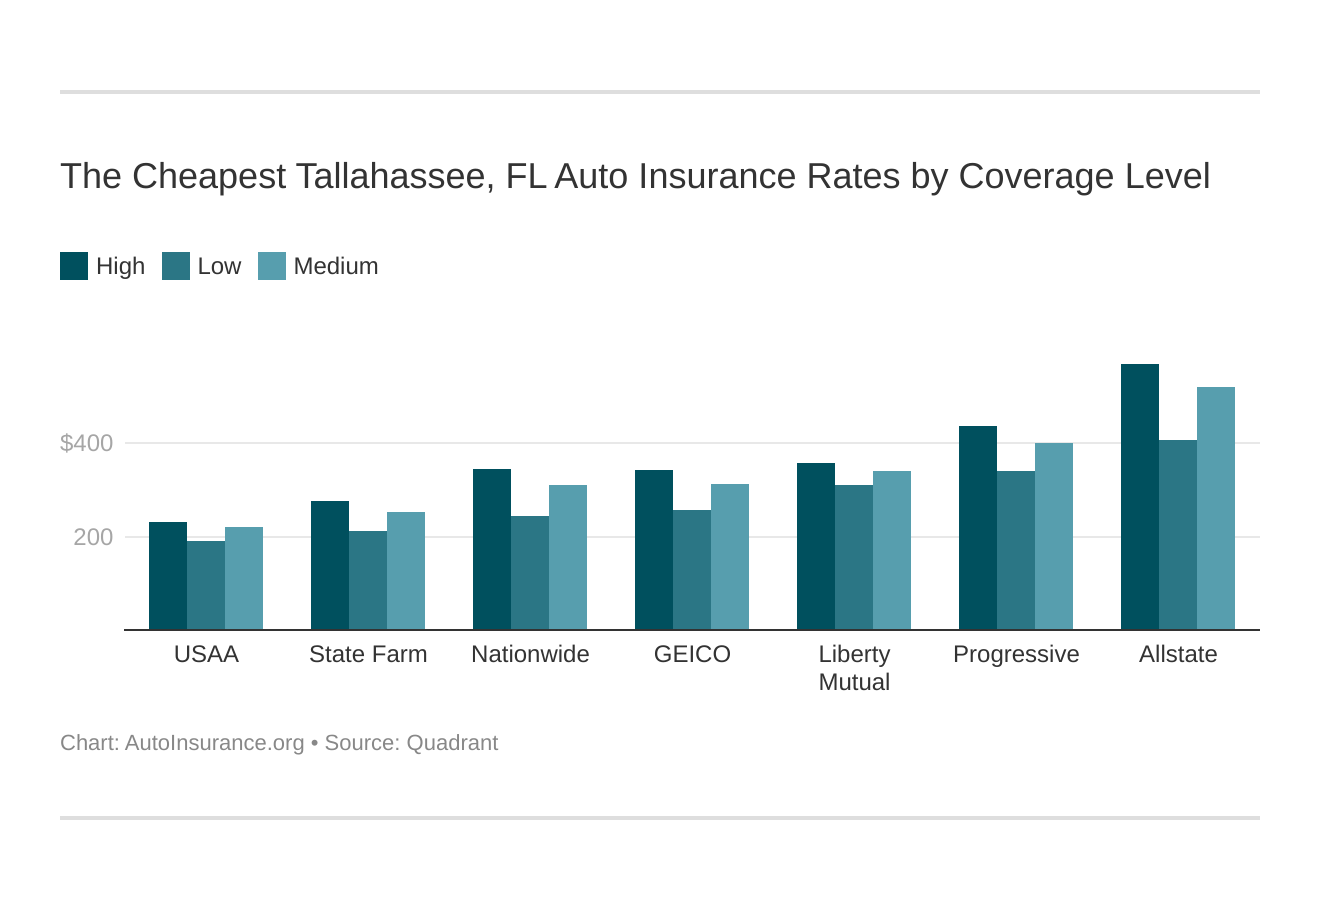 The Cheapest Tallahassee, FL Auto Insurance Rates by Coverage Level